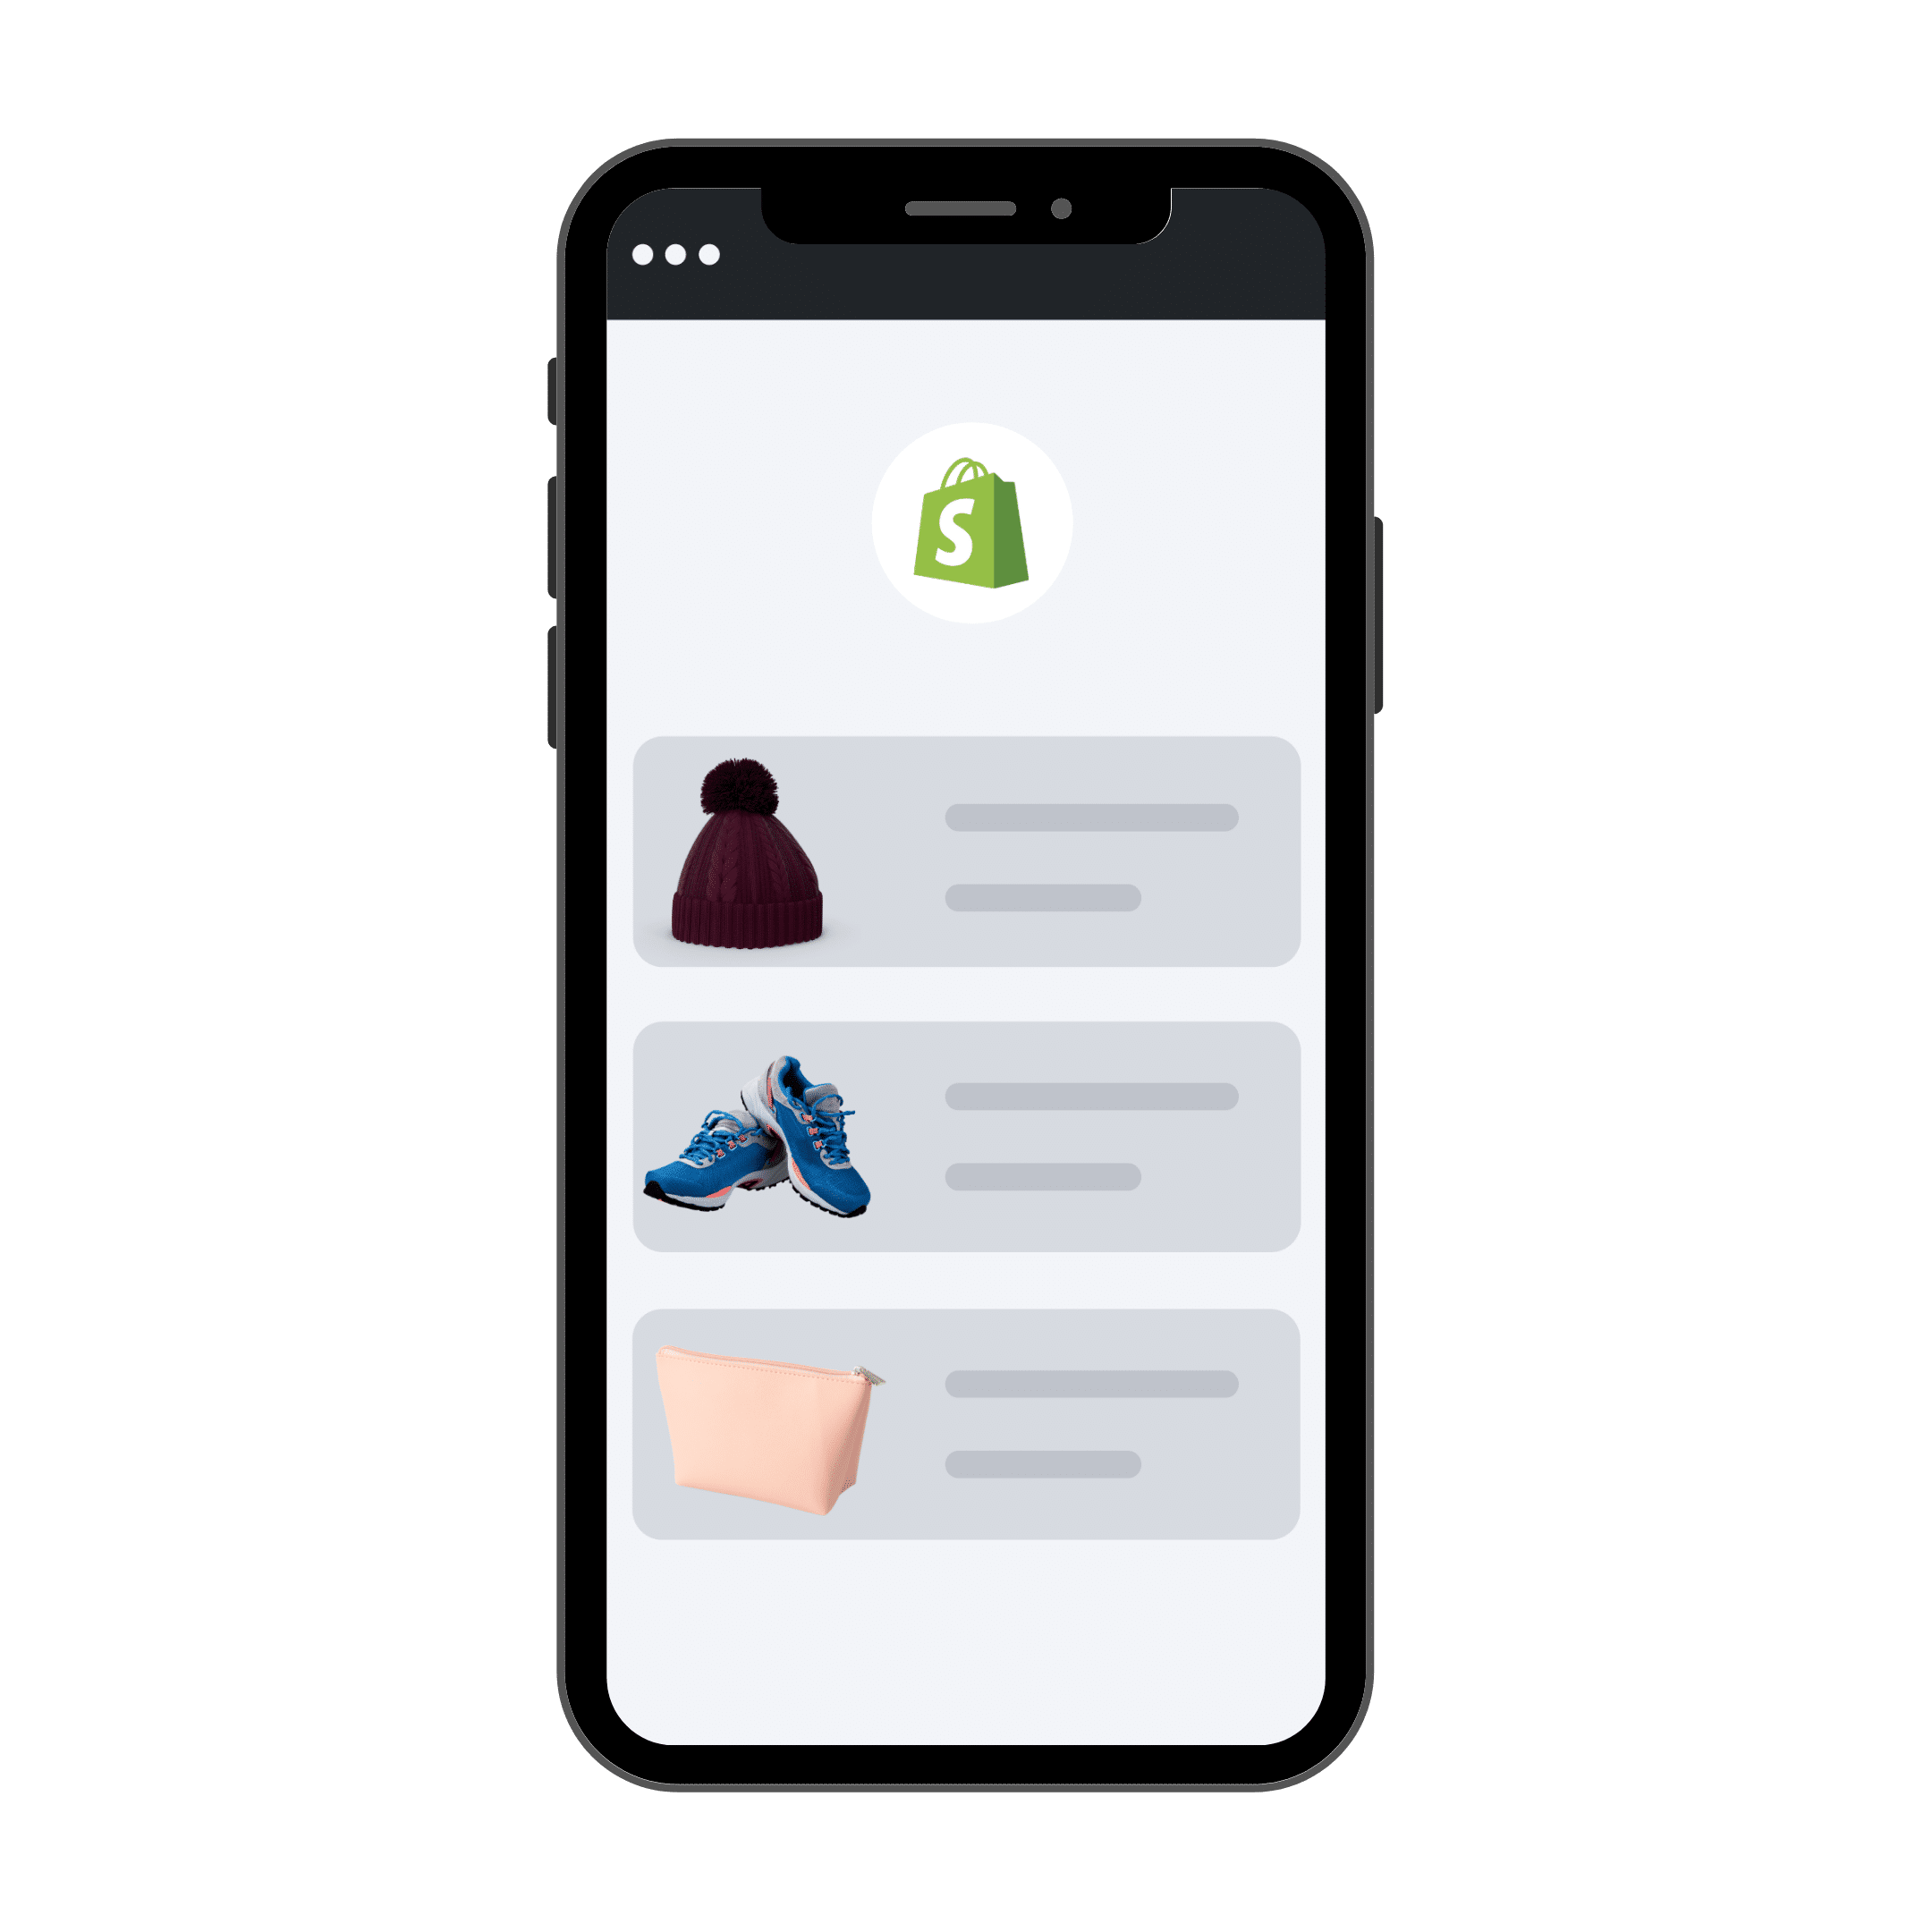 Phone with Shopify app opened.